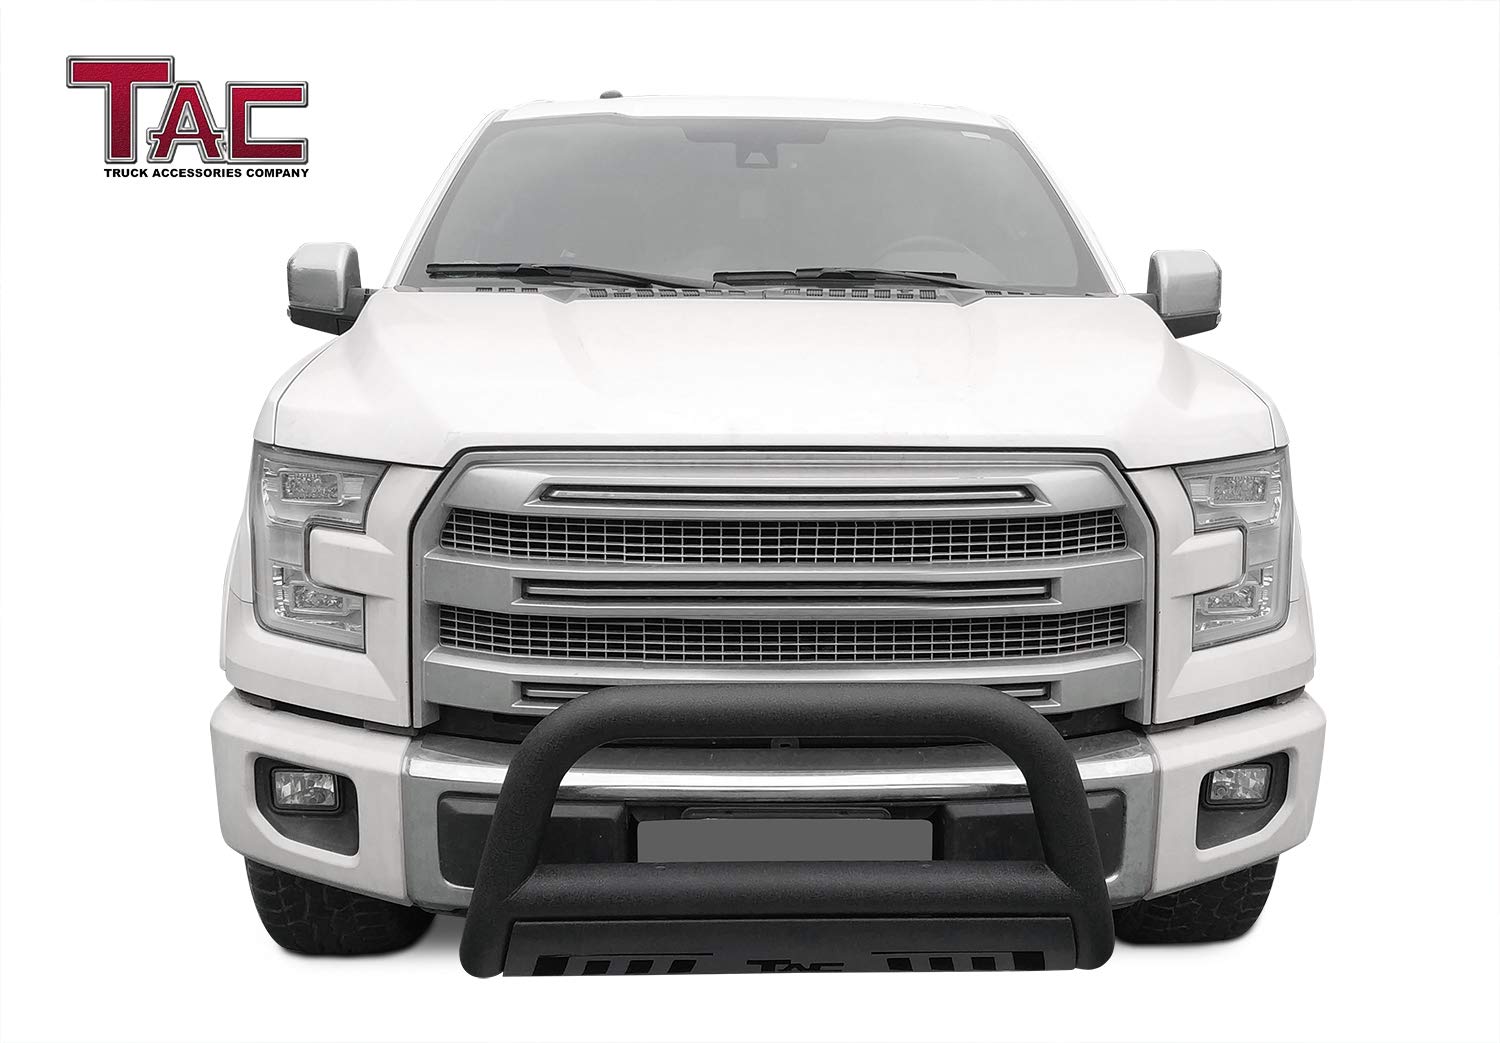 TAC Heavy Texture Black 3" Bull Bar For 2004-2024 Ford F150 | 2022-2024 F150 Lightning EV Truck (Excl. Heritage Edition and all F150 Raptor Models) / 2003-2017 Ford Expedition SUV Front Bumper Brush Grille Guard Nudge Bar - 0